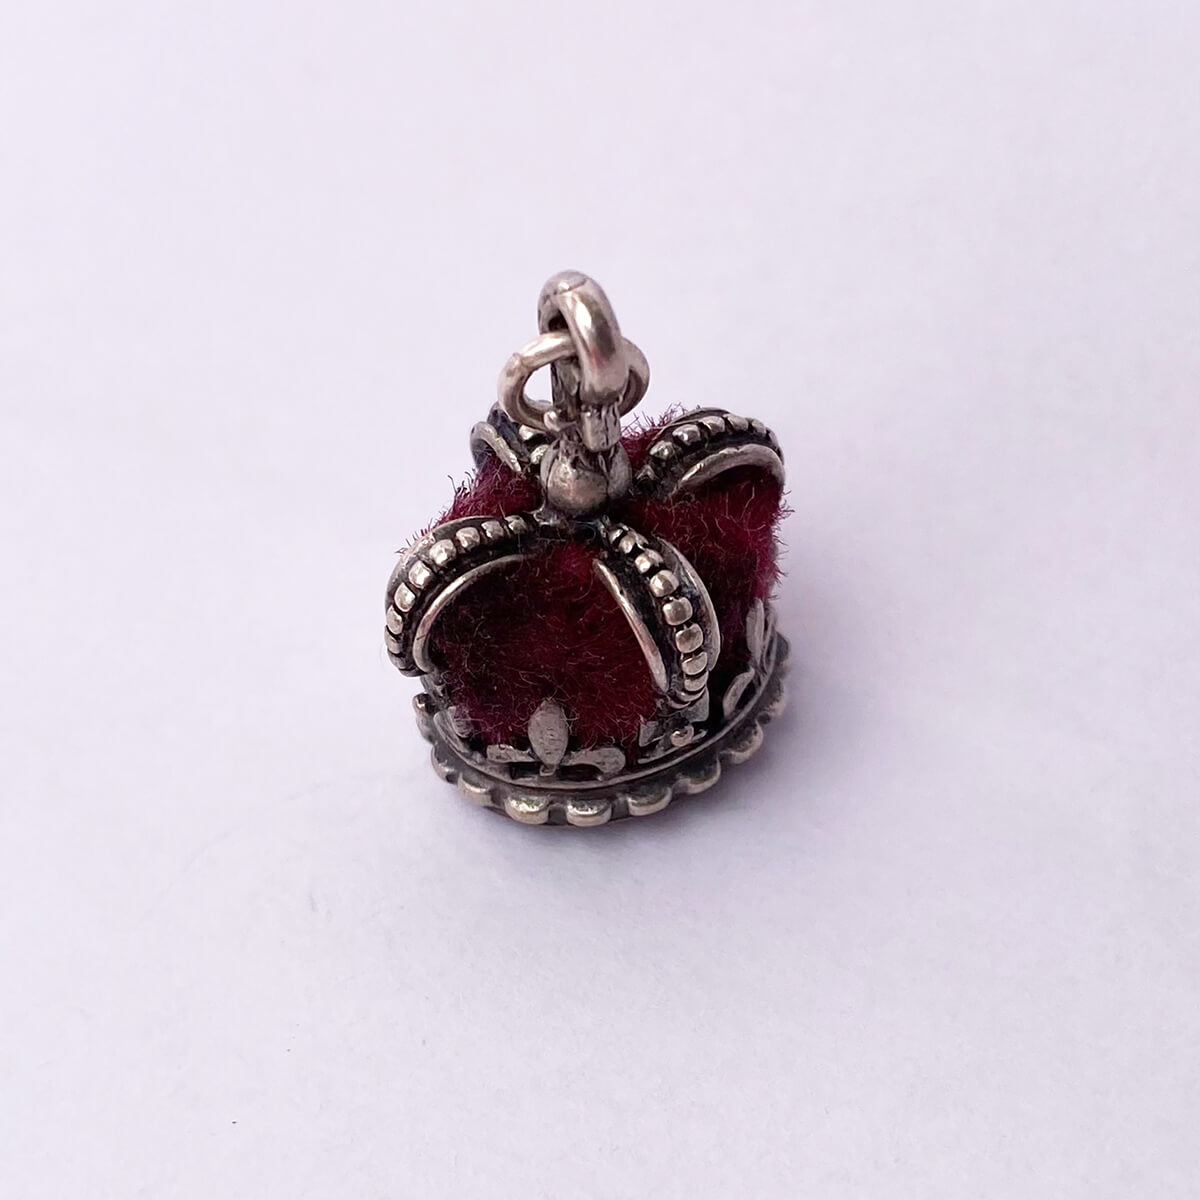 Sterling silver 1950s Beau royal crown charm with red velvet fabric